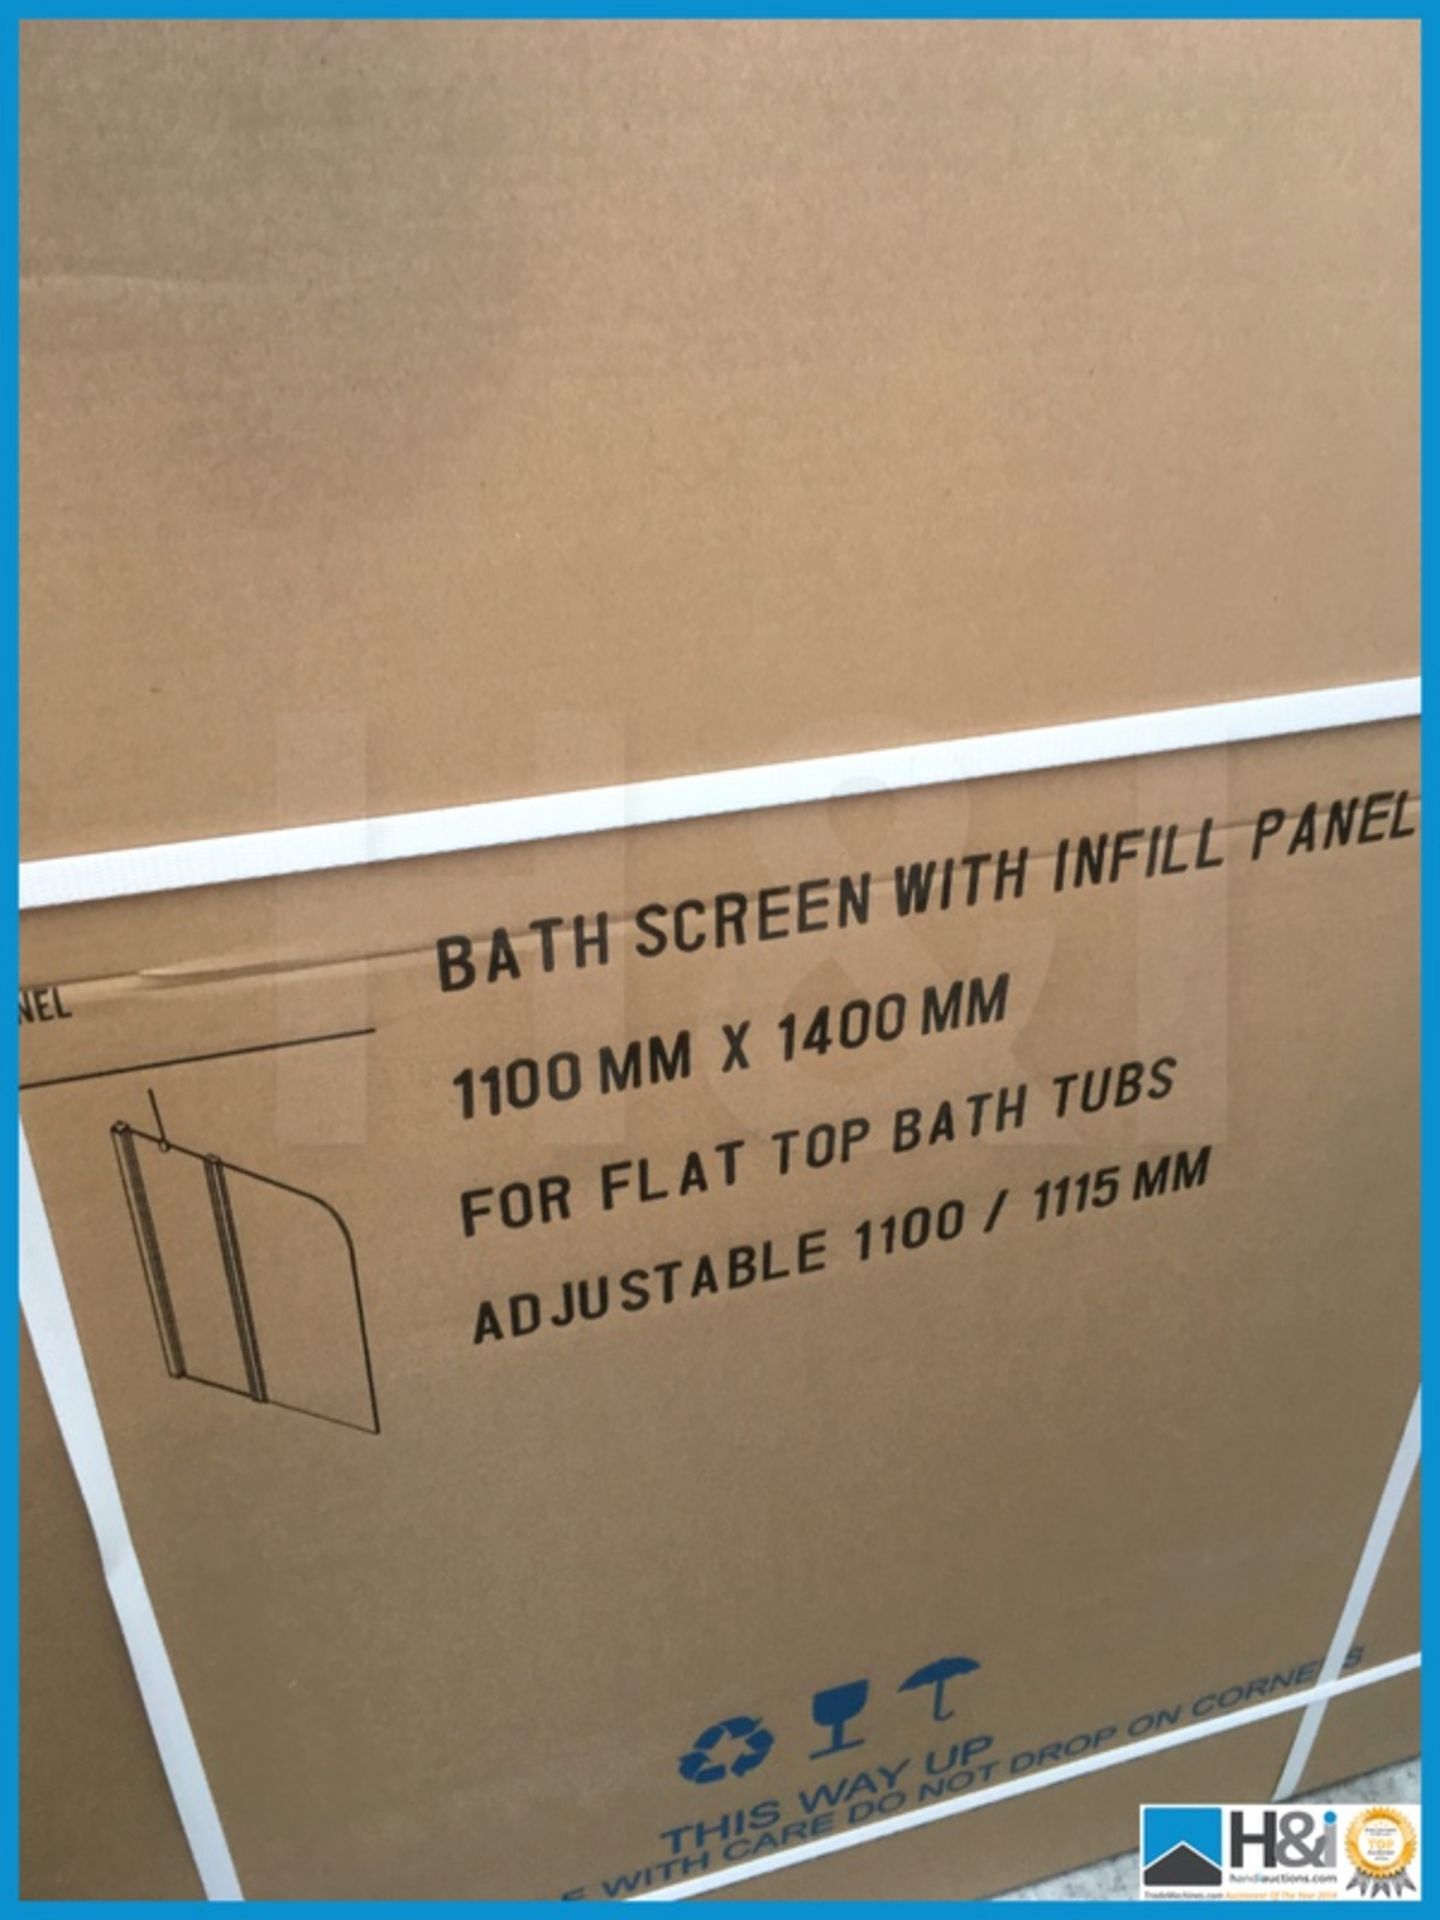 Designer Rainbow bath screen with infill panel 100x1400 for flat top bathtubs. New and boxed. - Image 4 of 4